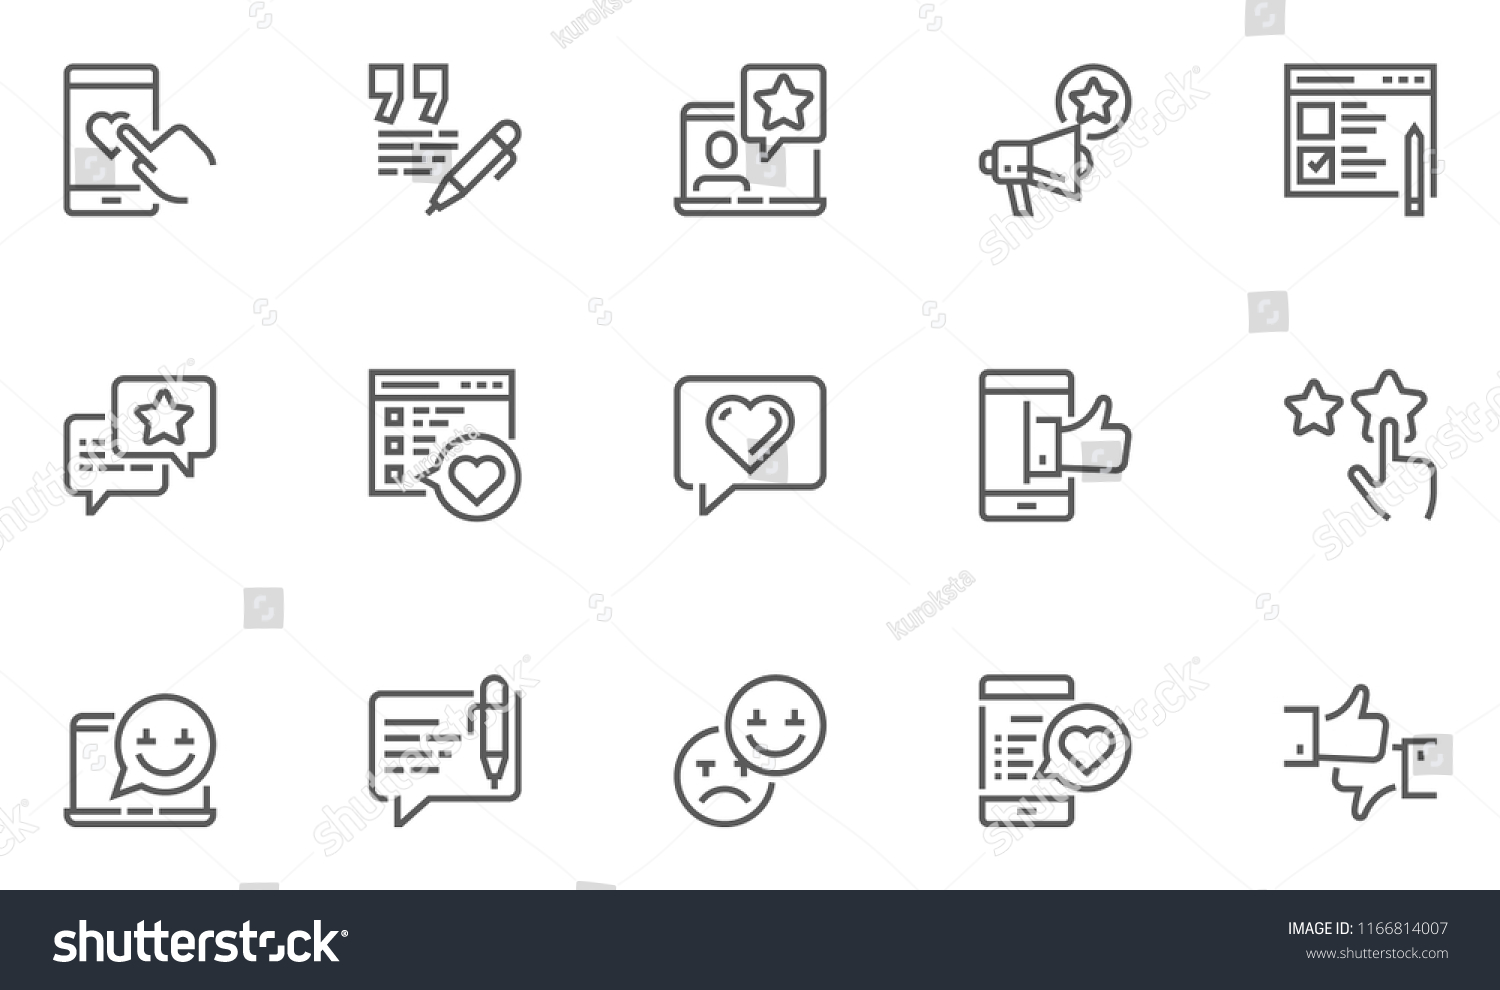 Feedback and Testimonials Vector Line Icons Set. Customer Relationship, Appreciations, Comments, Reviews. Editable Stroke. 48x48 Pixel Perfect. #1166814007